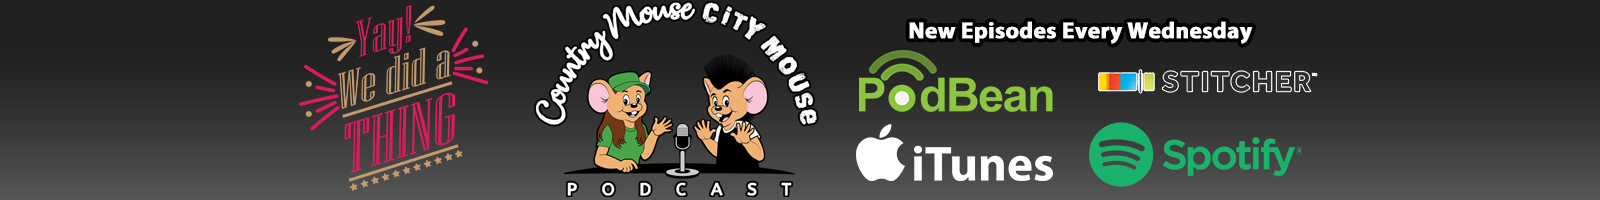 CC Mouse Podcast | Country Mouse City Mouse